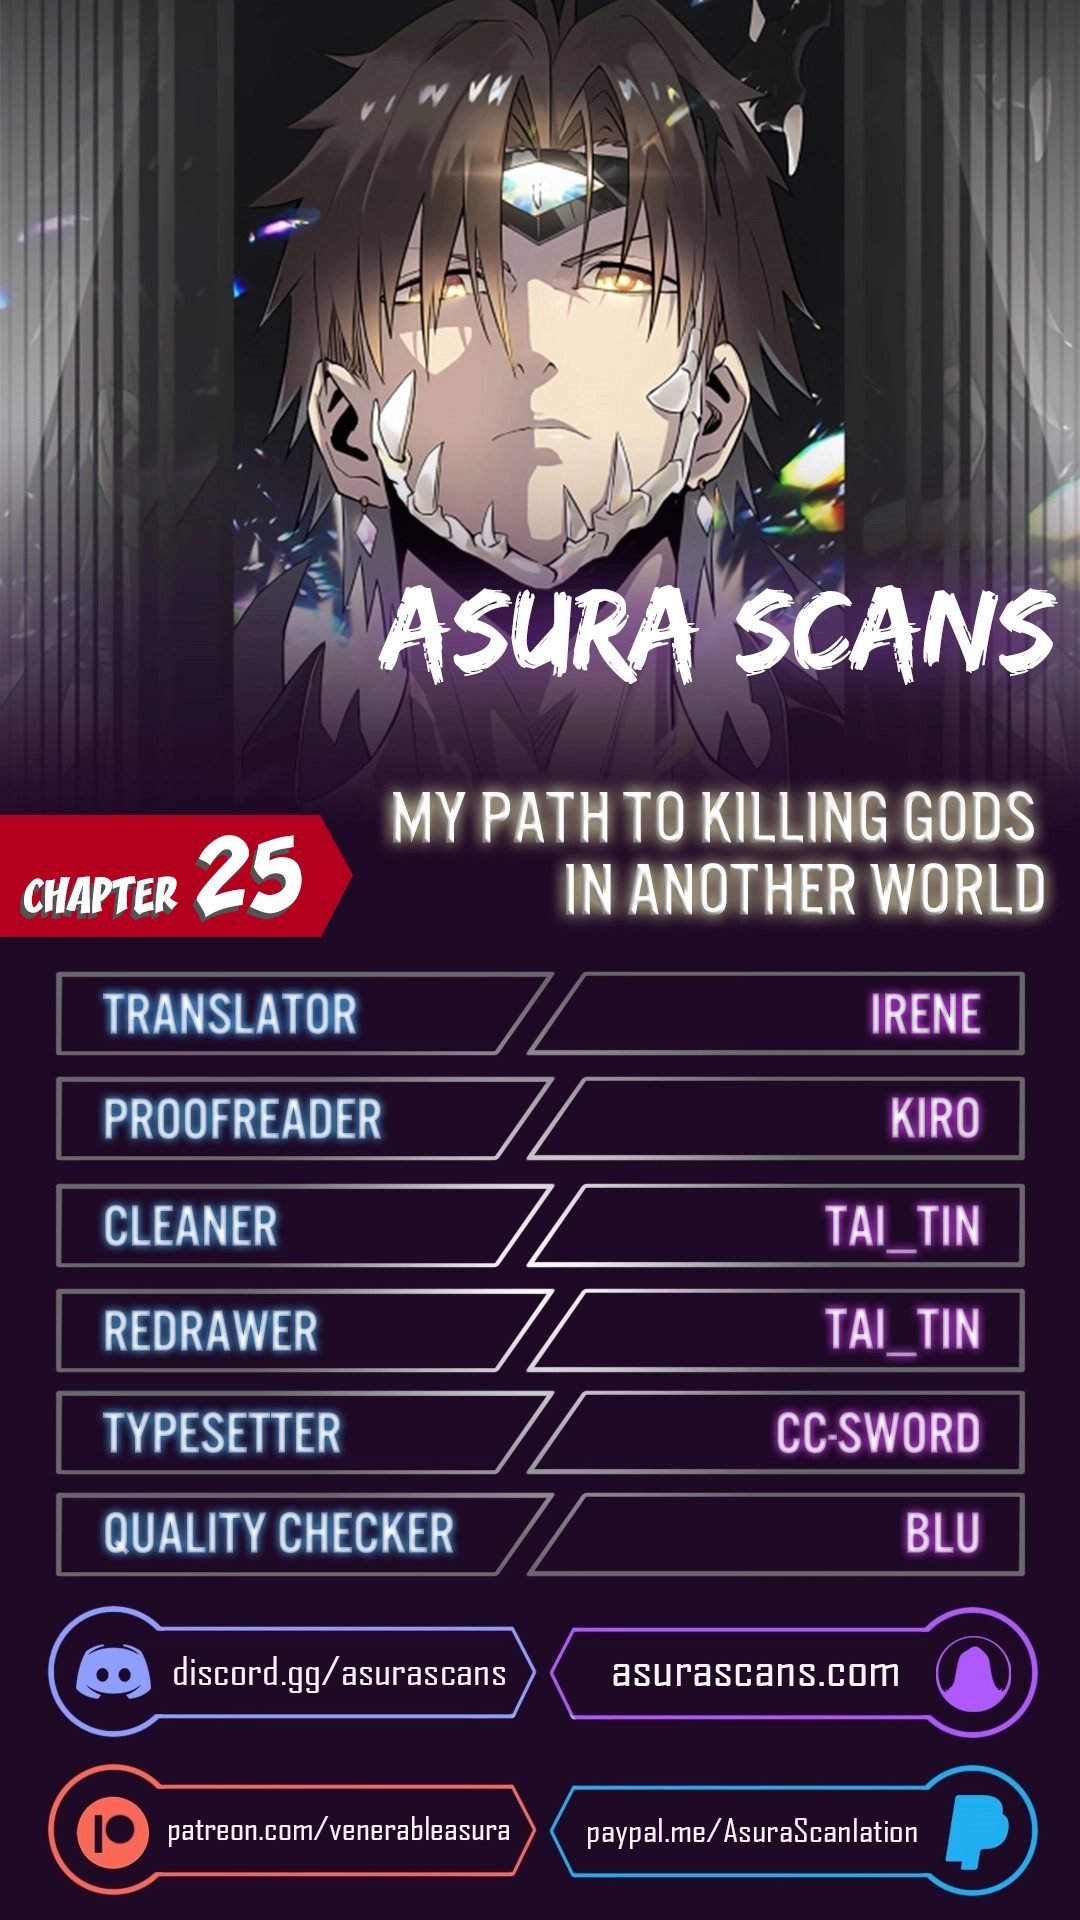 My Path to Killing Gods in Another World - Chapter 23176 - Image 1